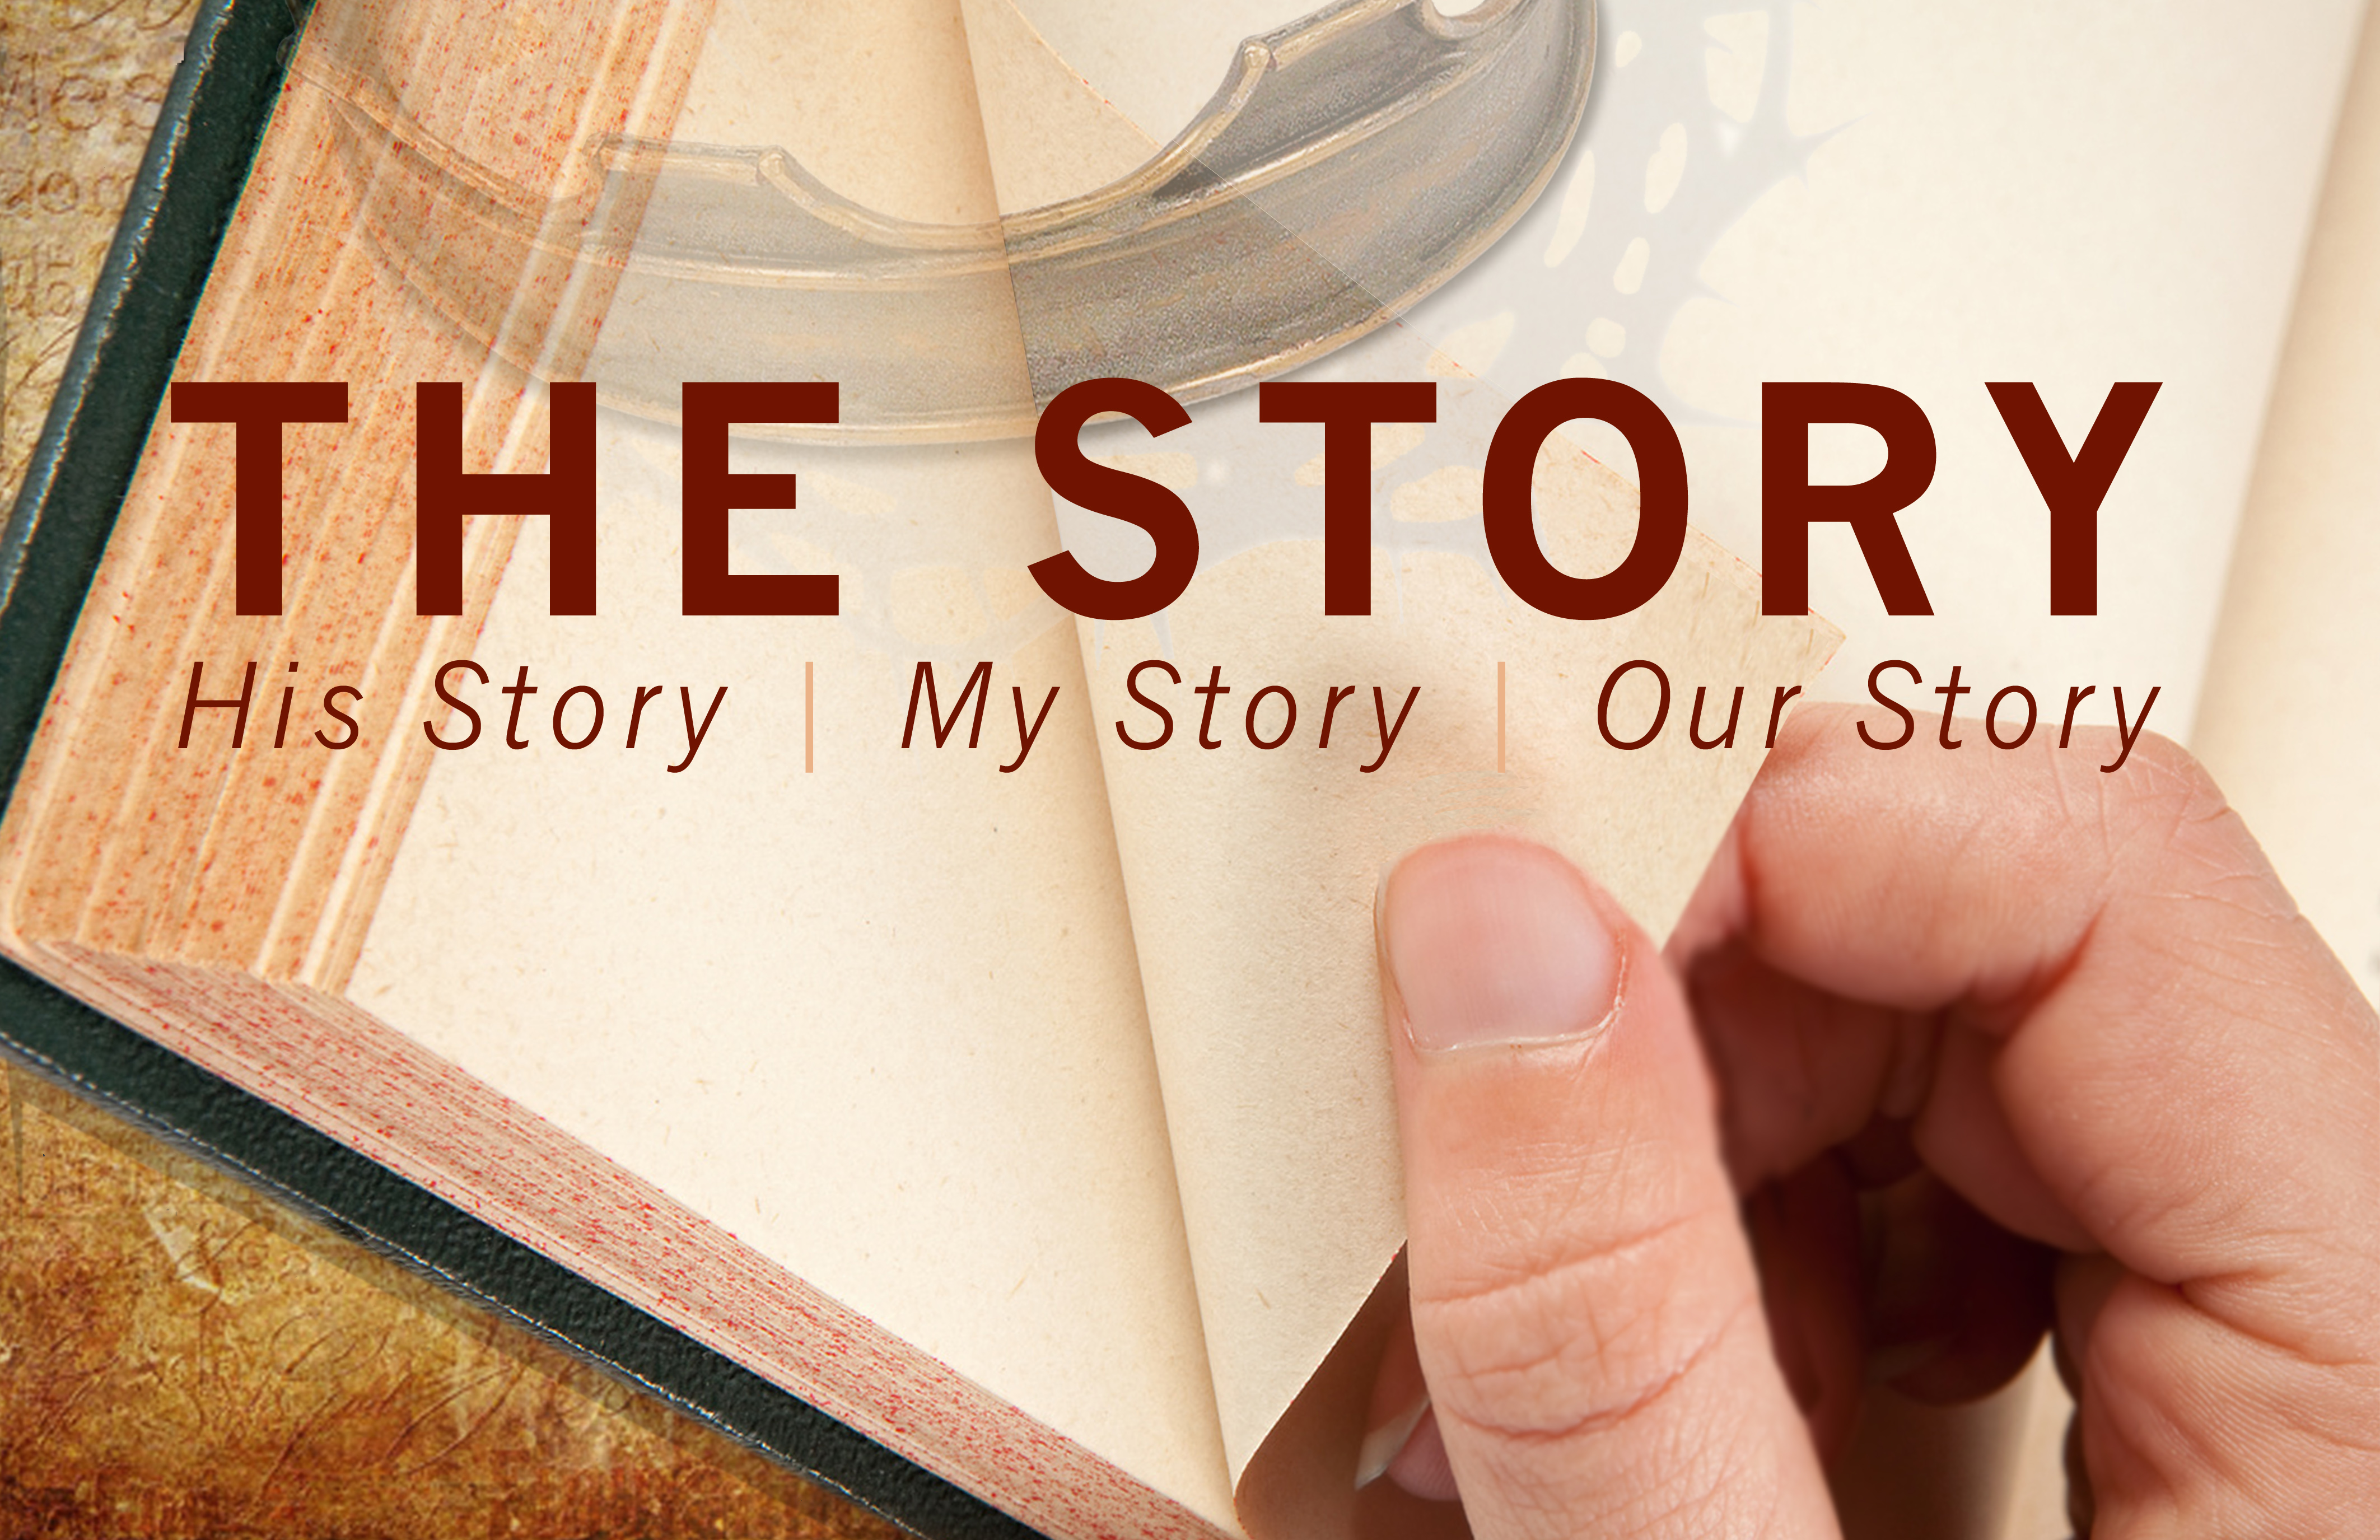 Story of a low rank. Our story. Our New story картинки. Through story. Image story.